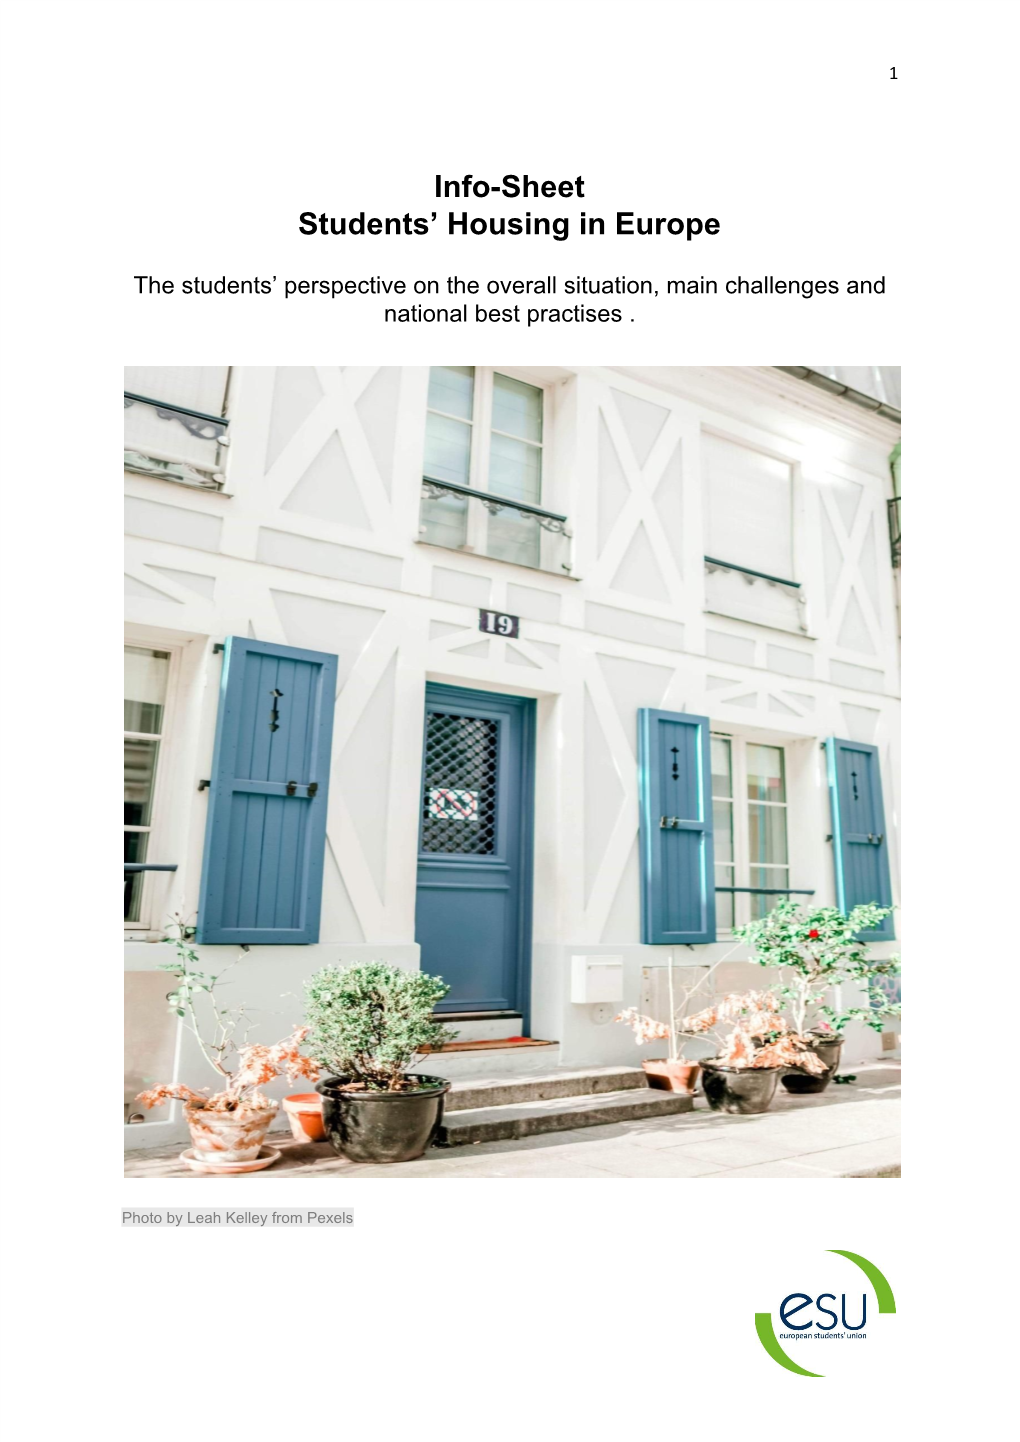 Info-Sheet Students' Housing in Europe